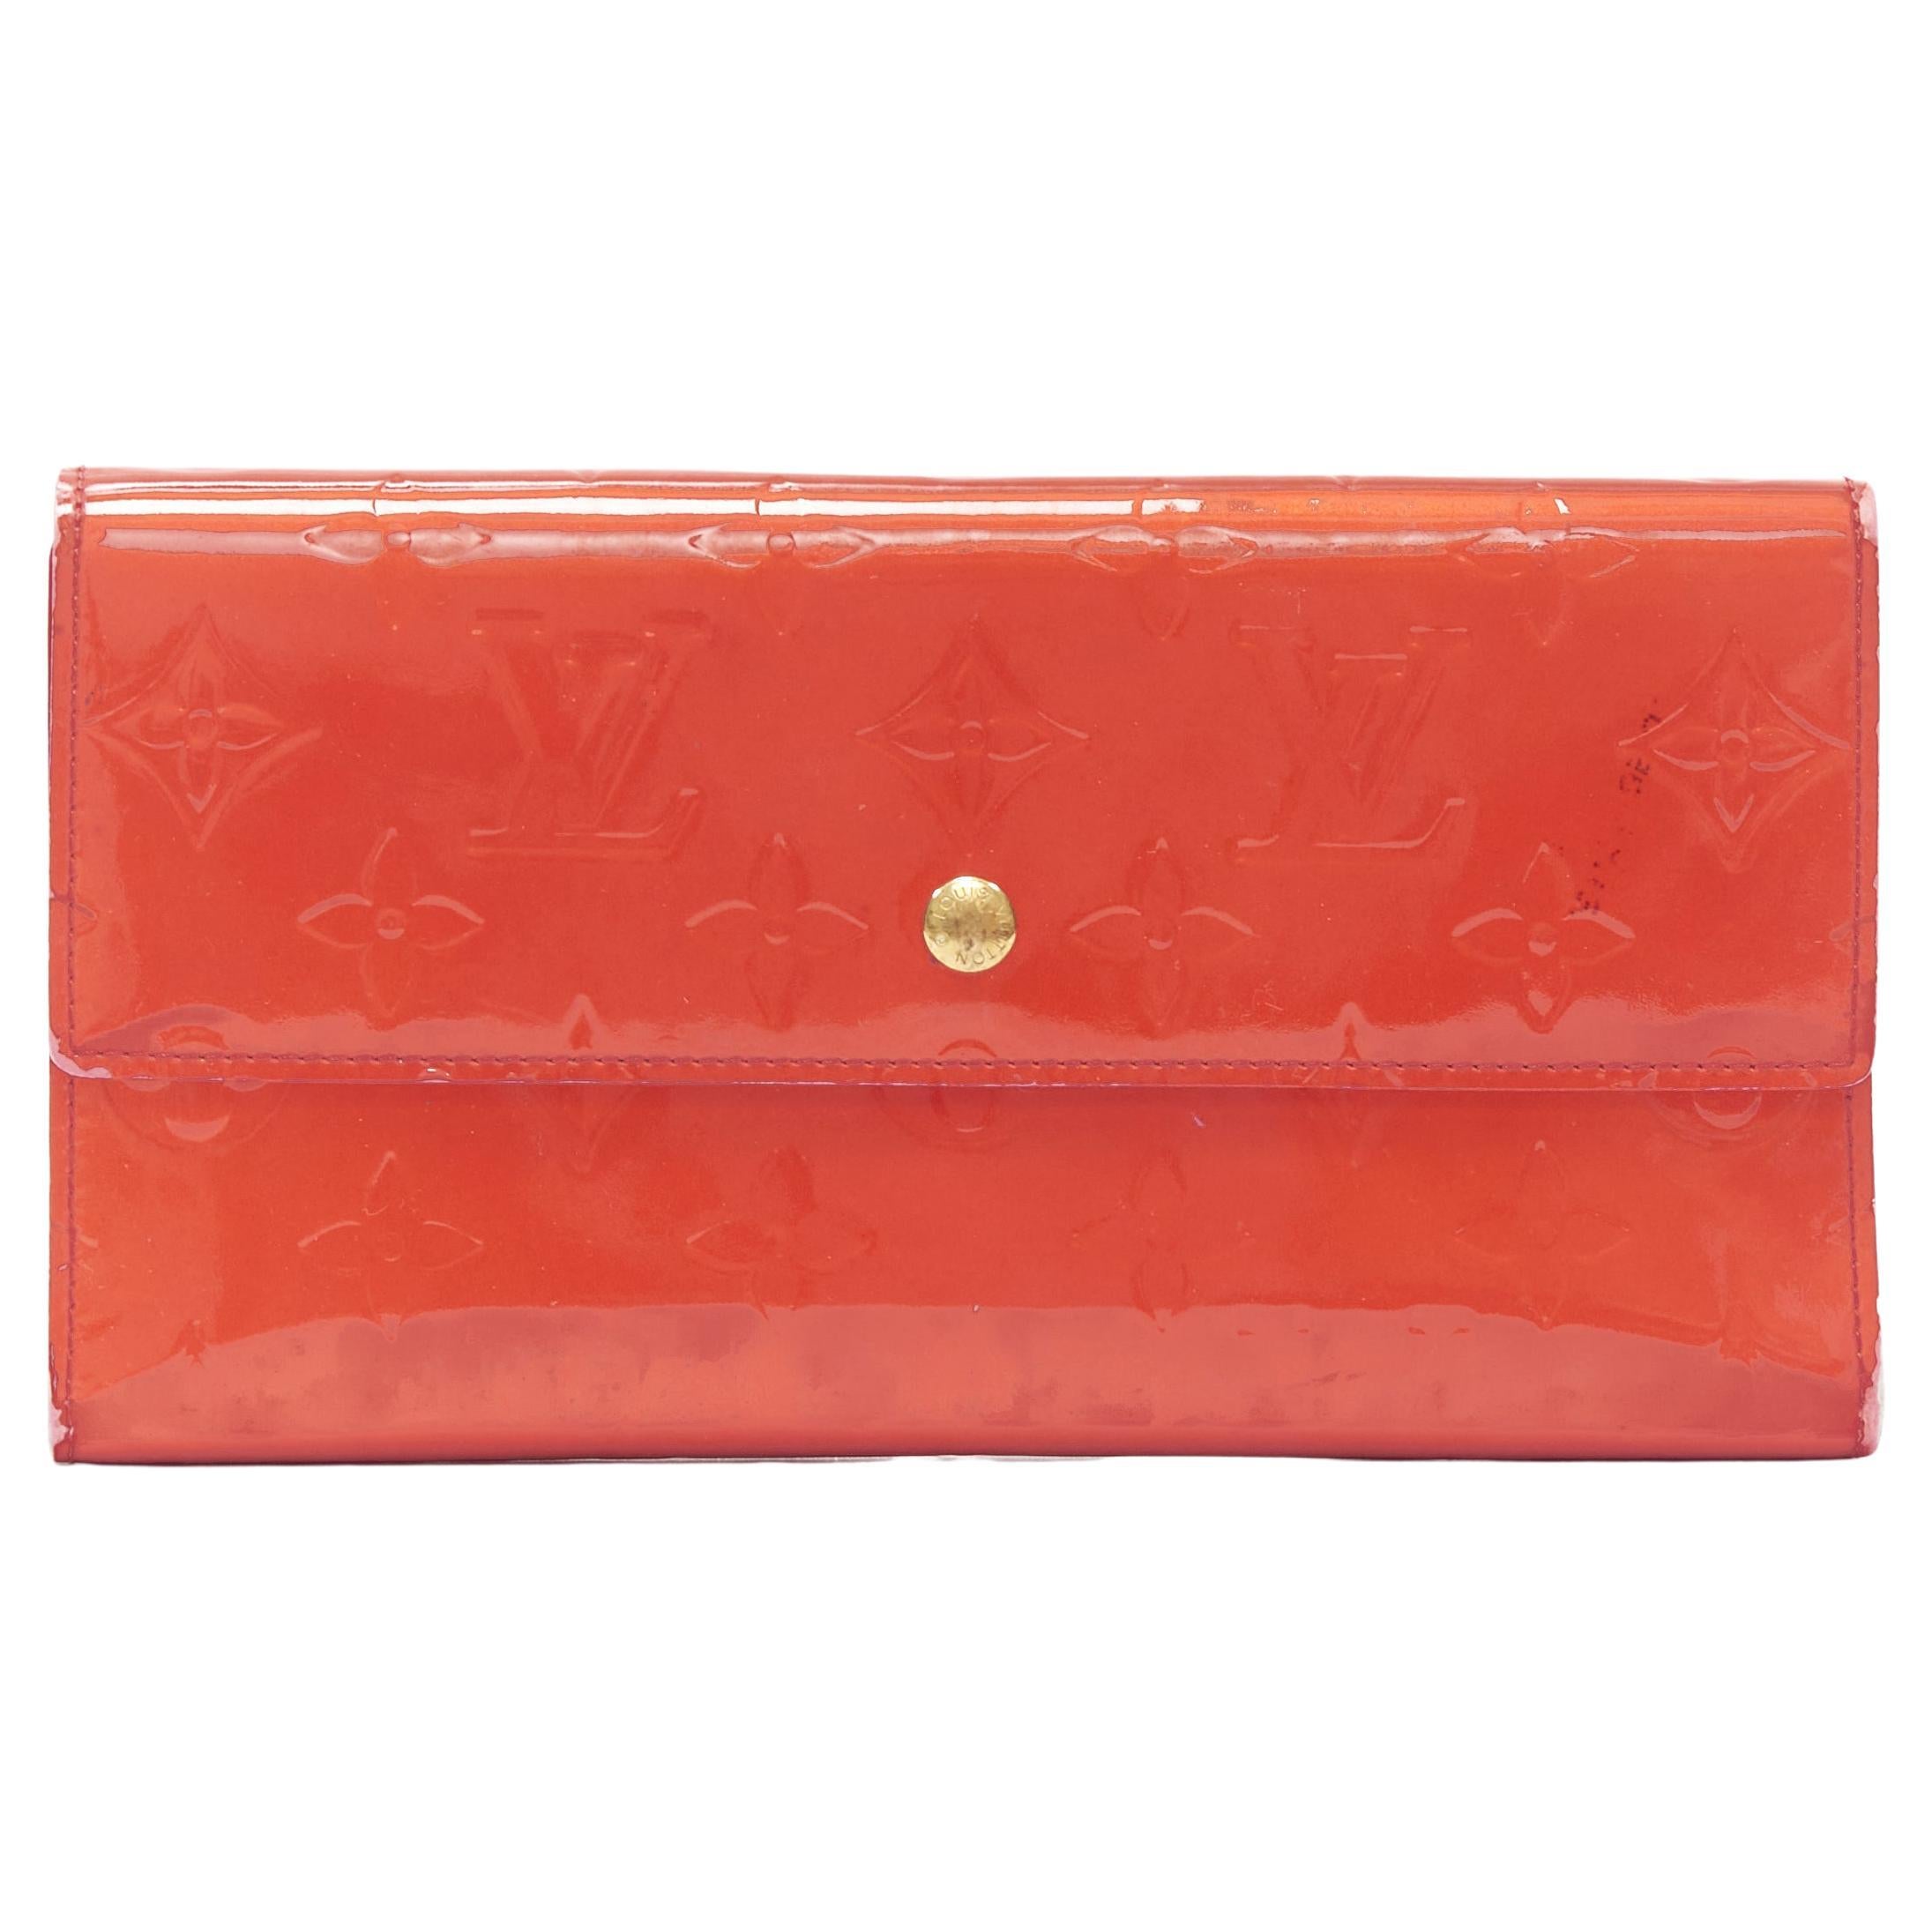 LOUIS VUITTON Vernis red patent LV logo emboss flap continental wallet For Sale